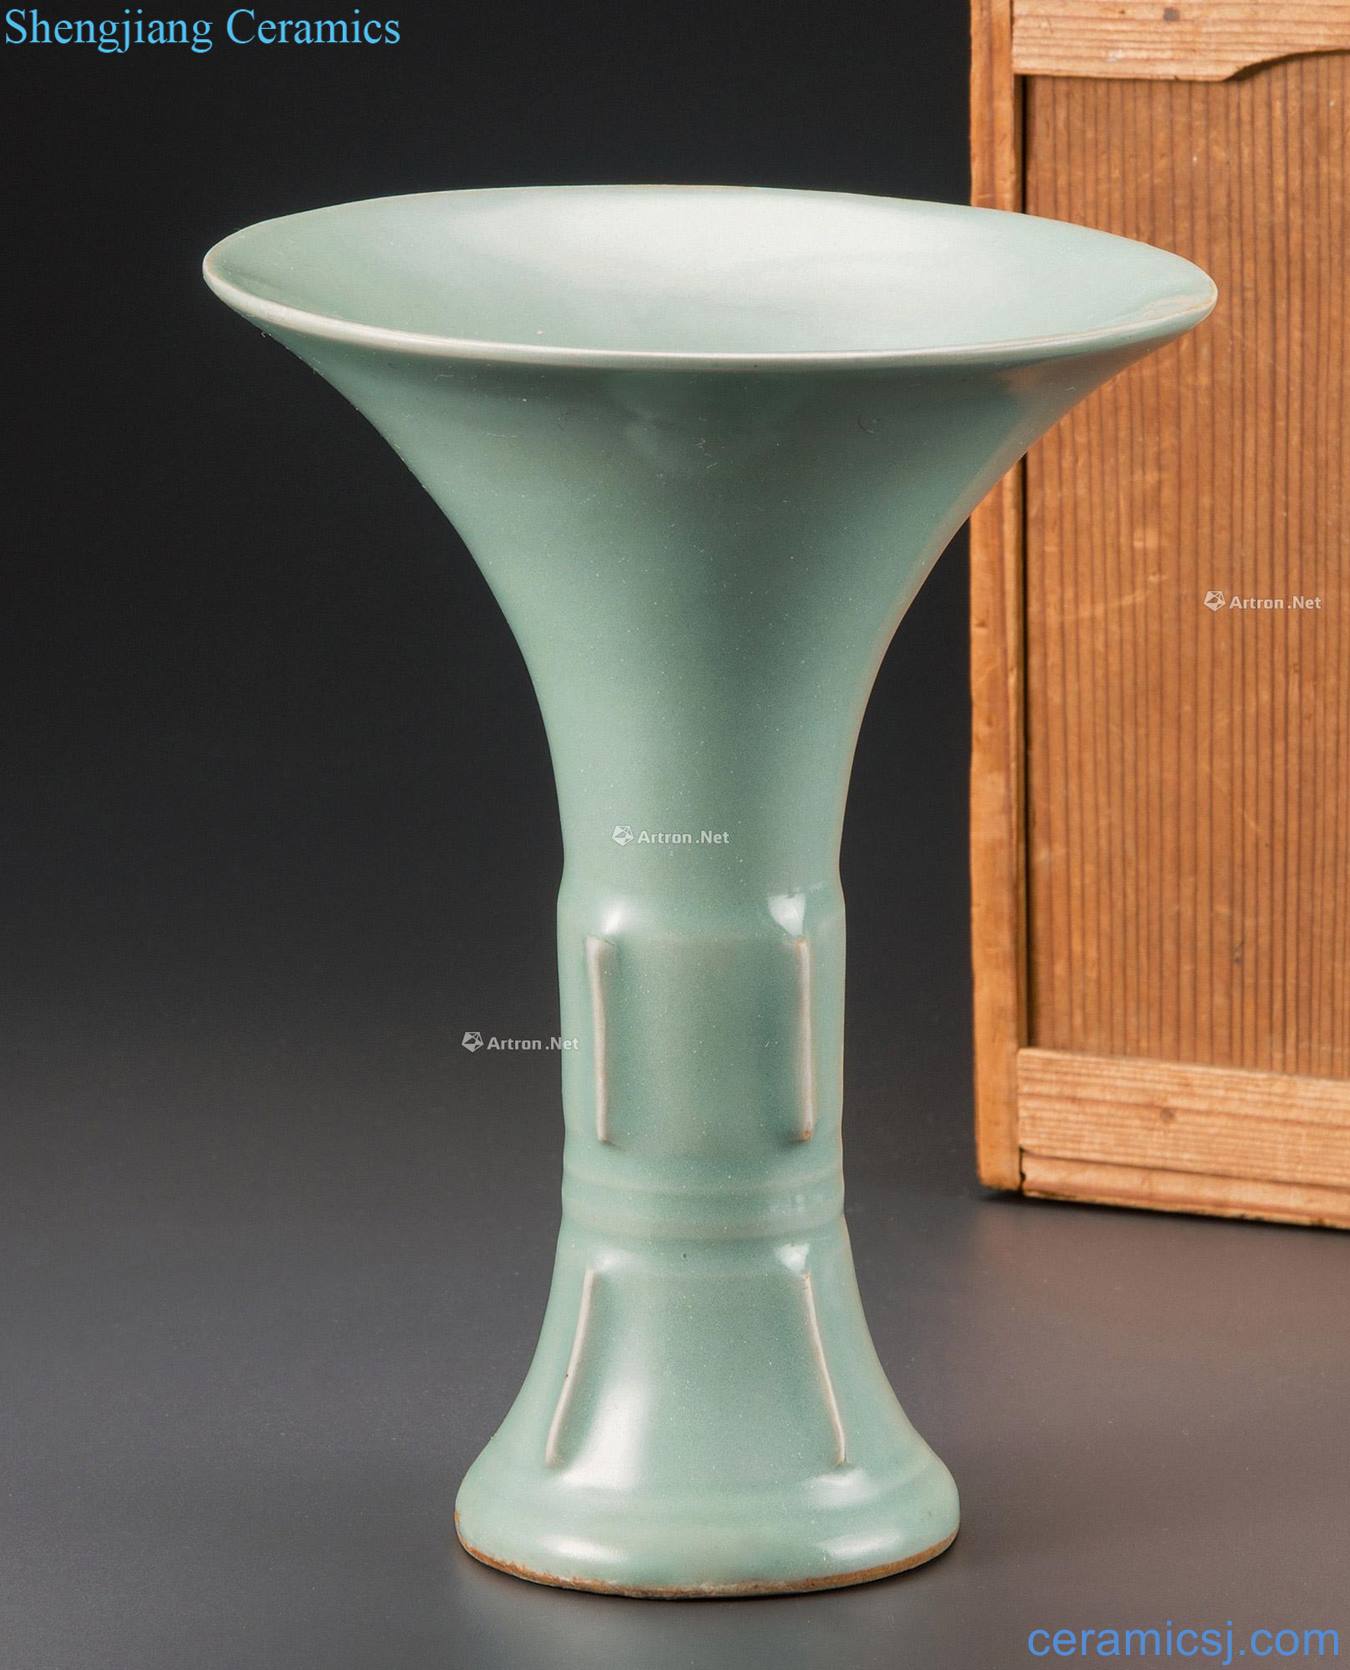 The southern song dynasty The official flower vase with of the longquan celadon